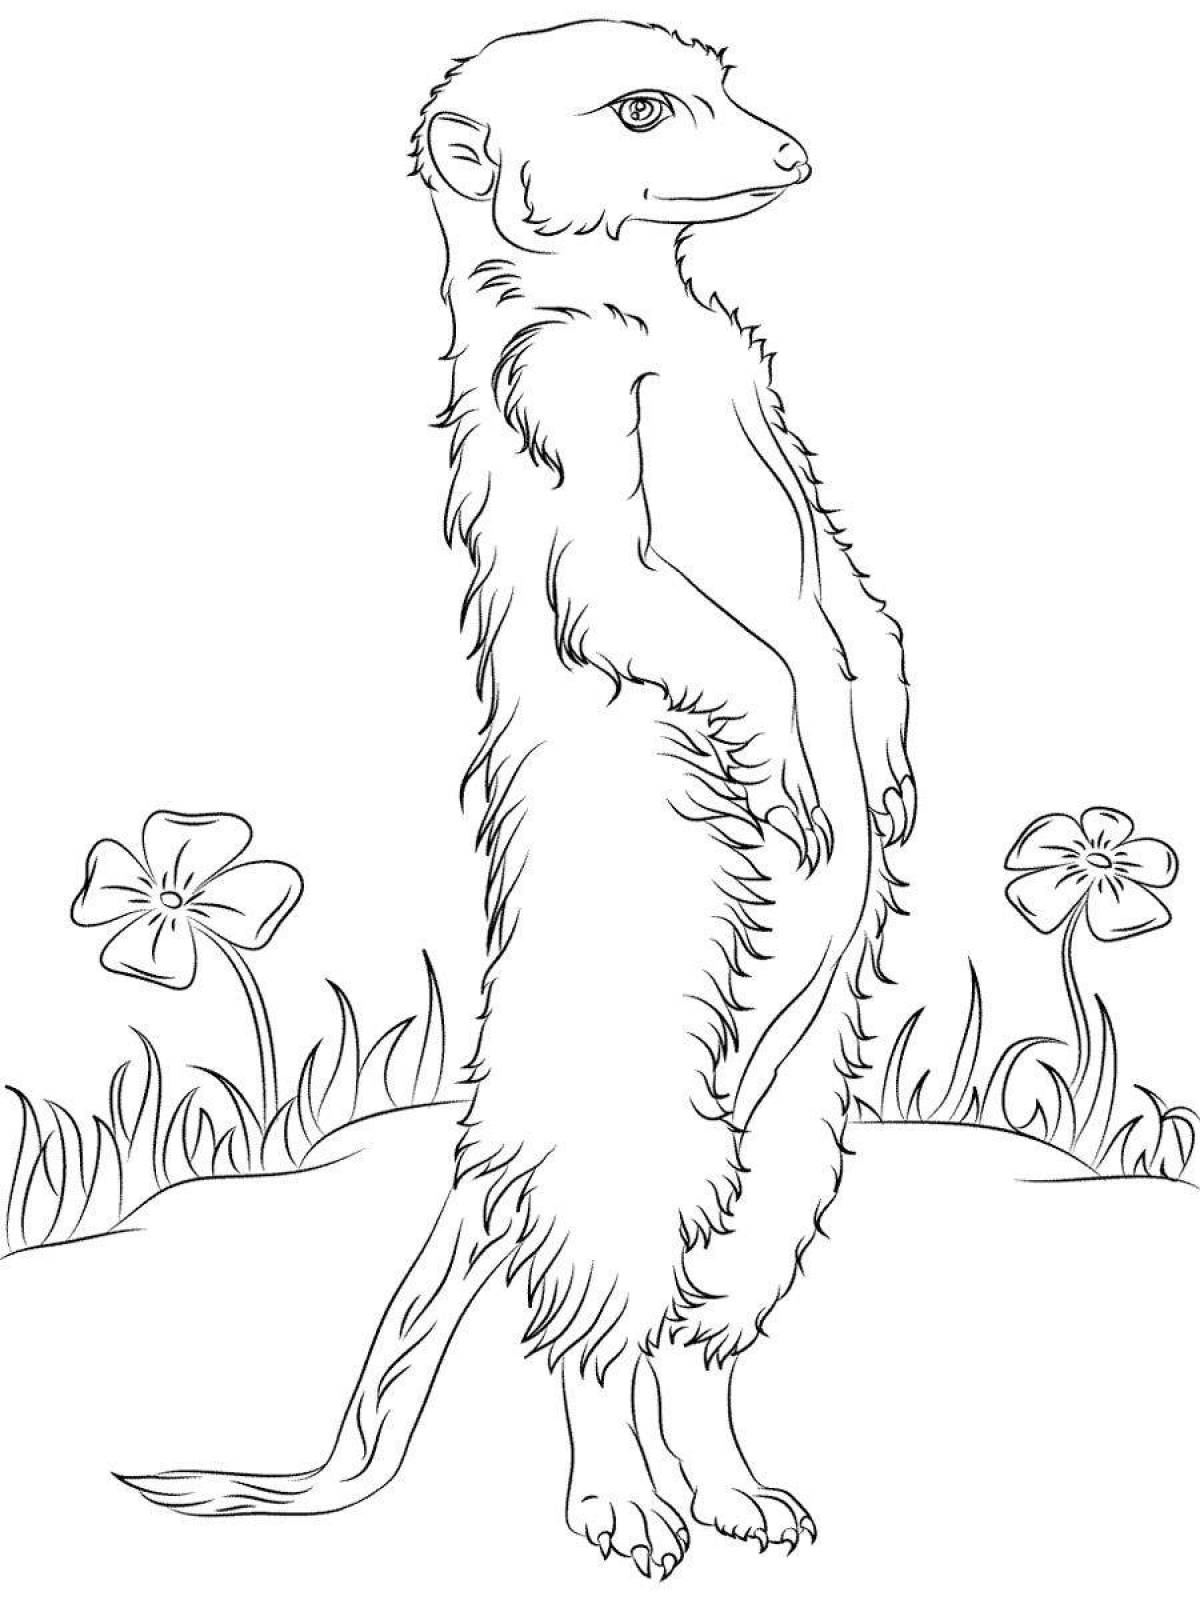 Cute mongoose coloring page